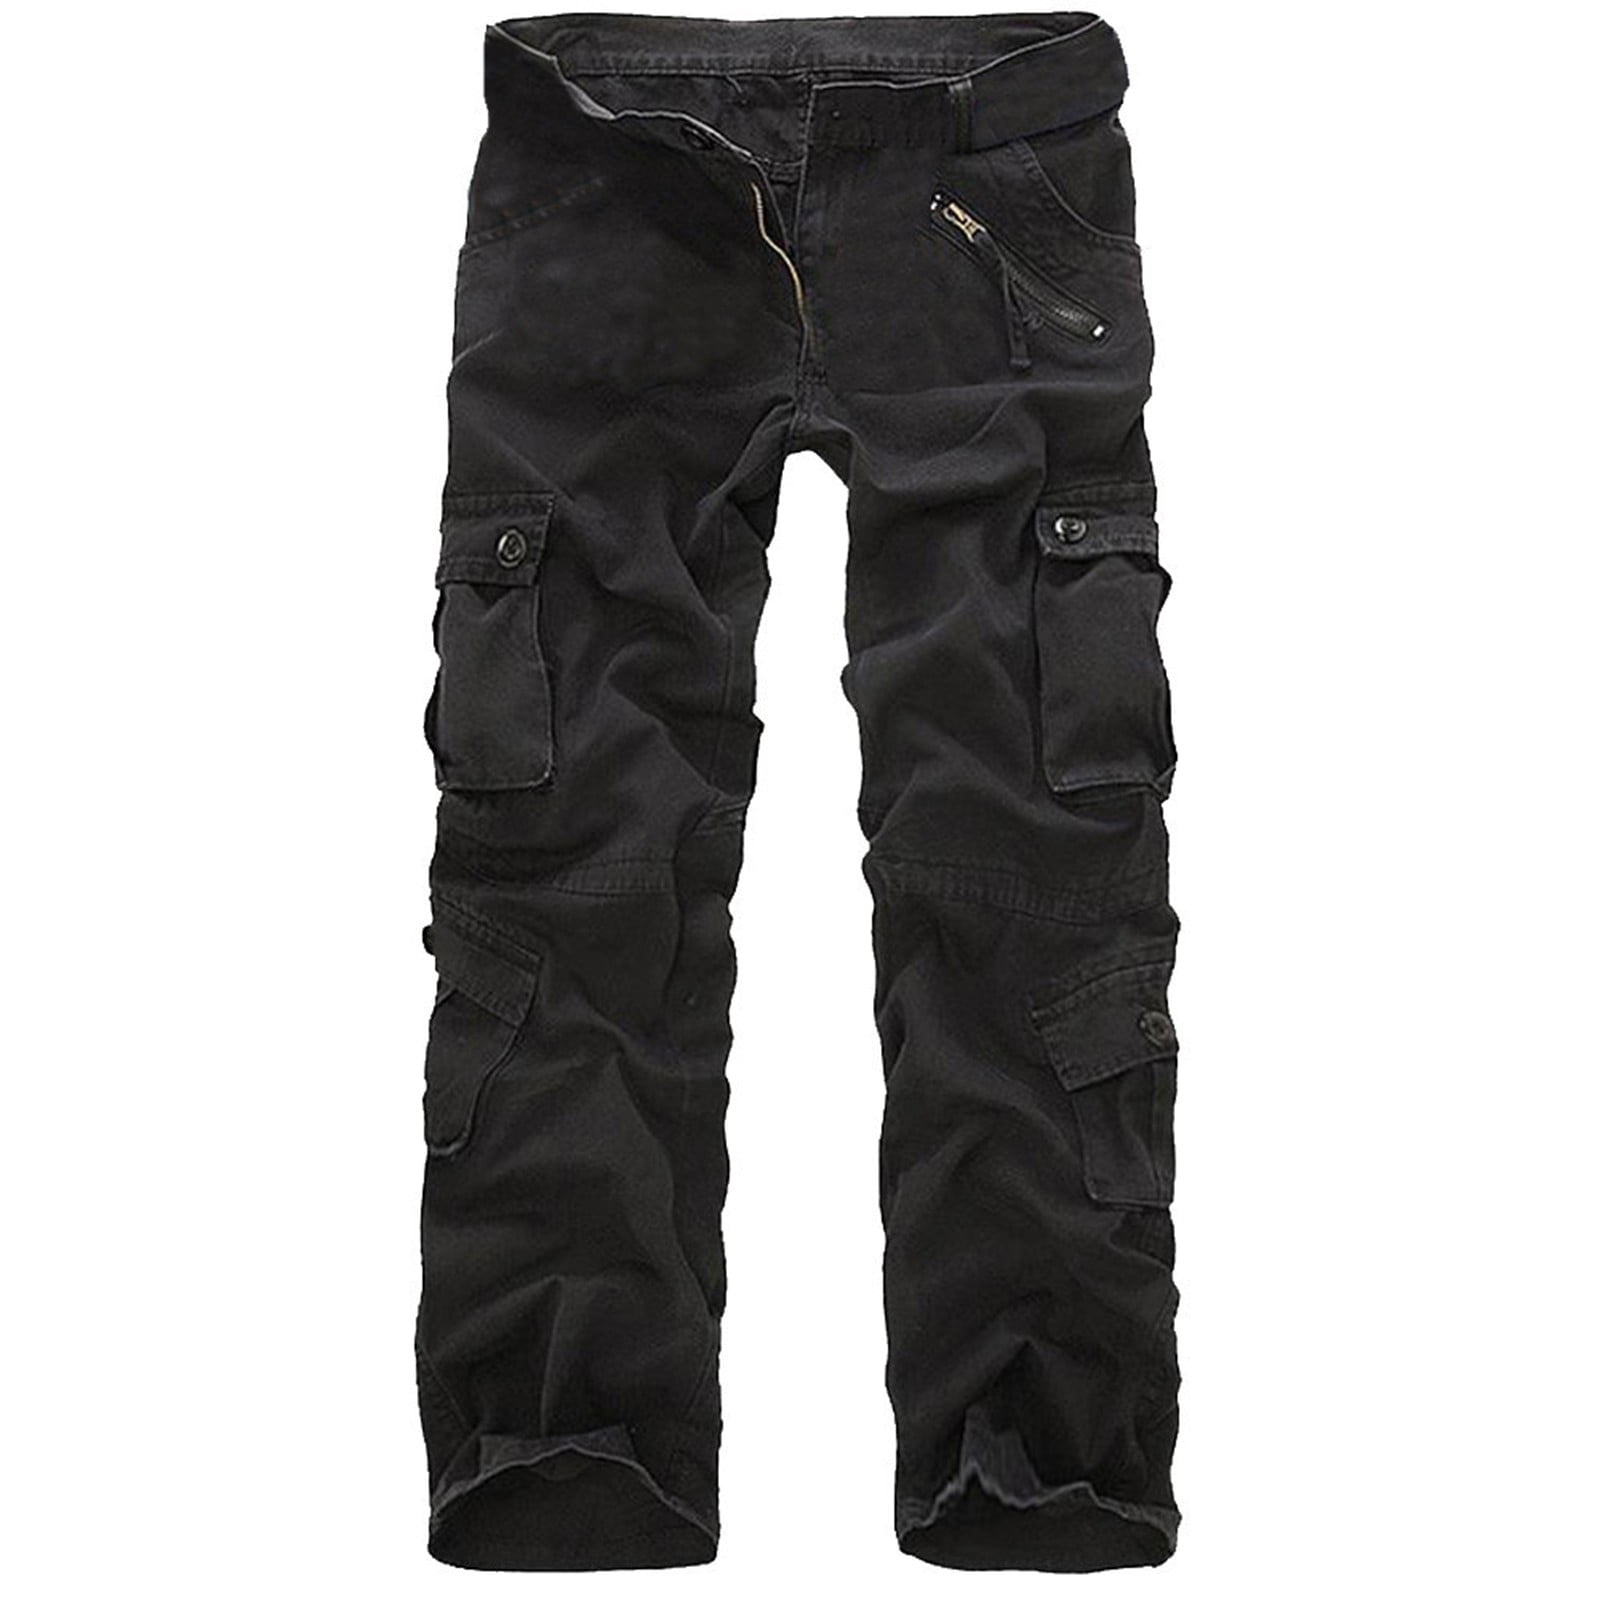 Bulkbuy Waterproof Tactical Cargo Pants Black Military Outdoor Camouflage  Trousers price comparison